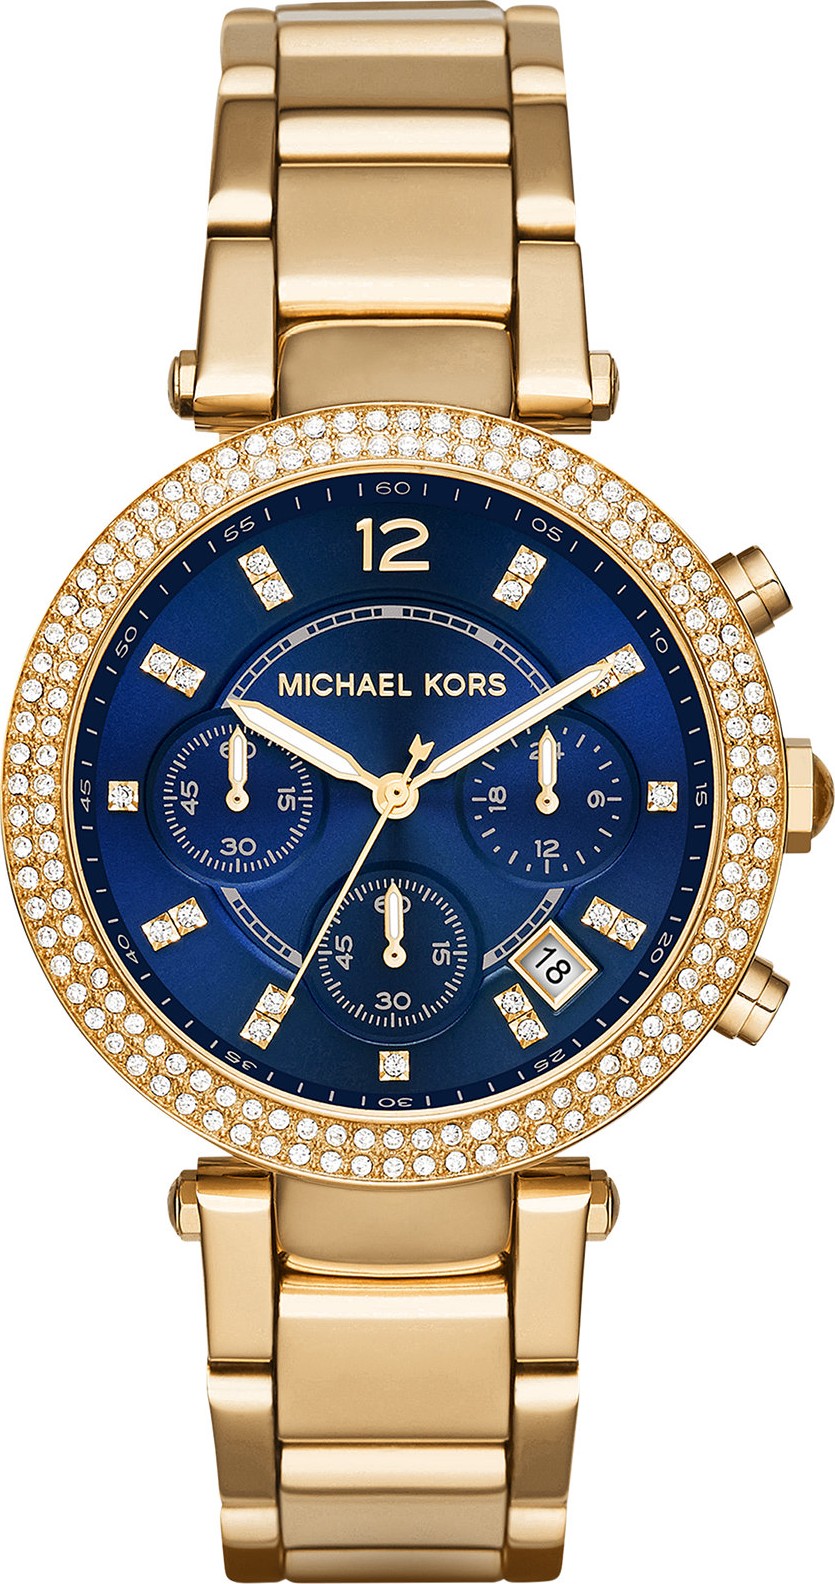 Amazoncom Michael Kors Womens Parker Stainless Steel Quartz Watch with  PVC Strap White 20 Model MK6916  Clothing Shoes  Jewelry